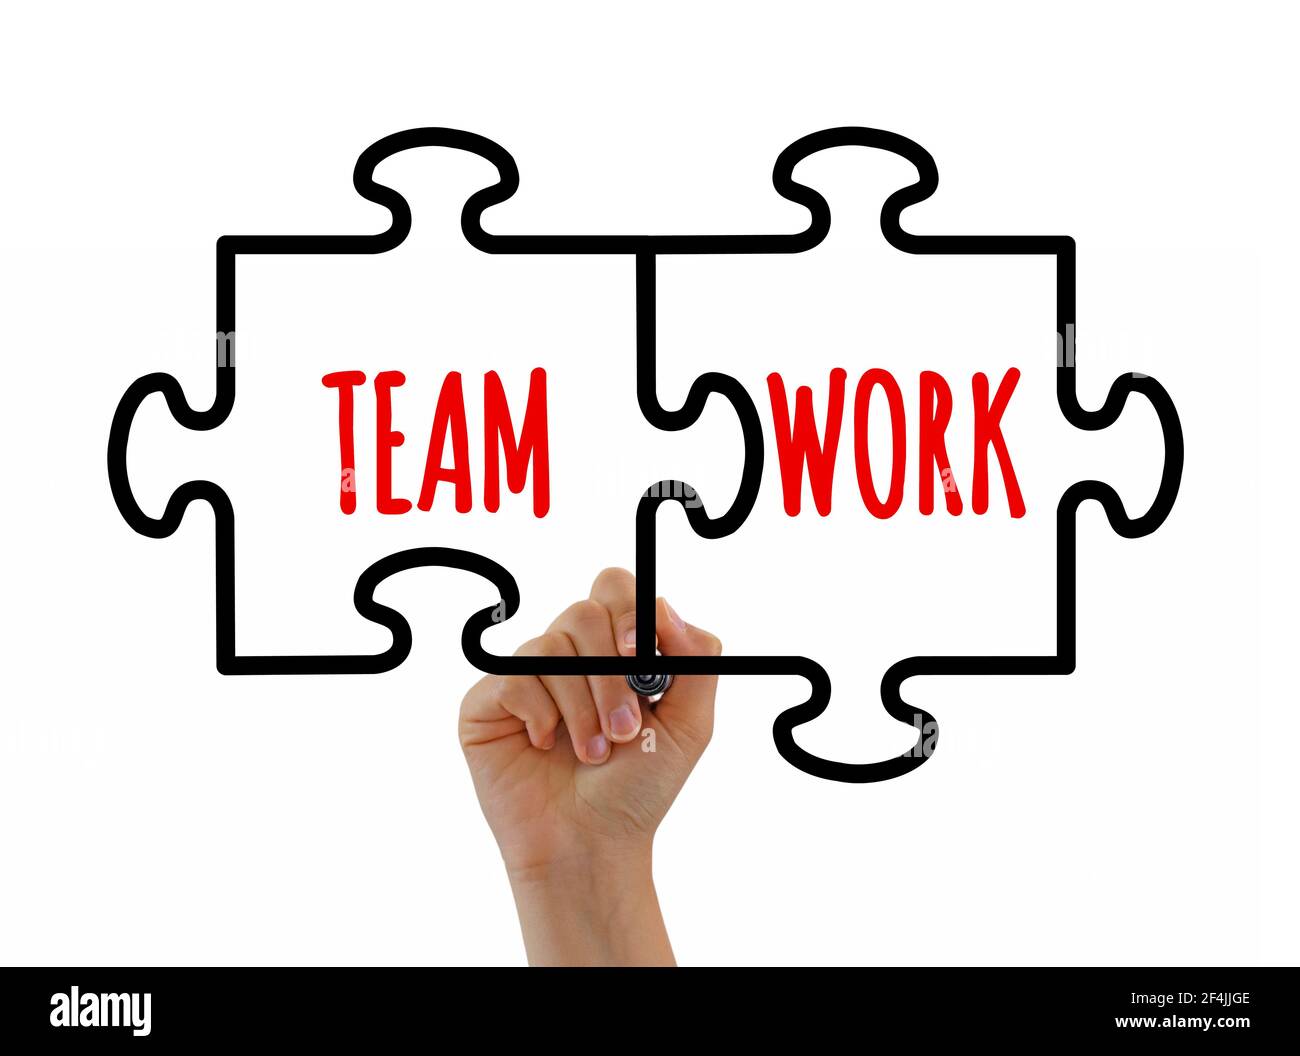 Hand sketching teamwork jigsaw puzzle pieces concept with black marker on transparent glass board or white background. Teamwork success concept. Stock Photo